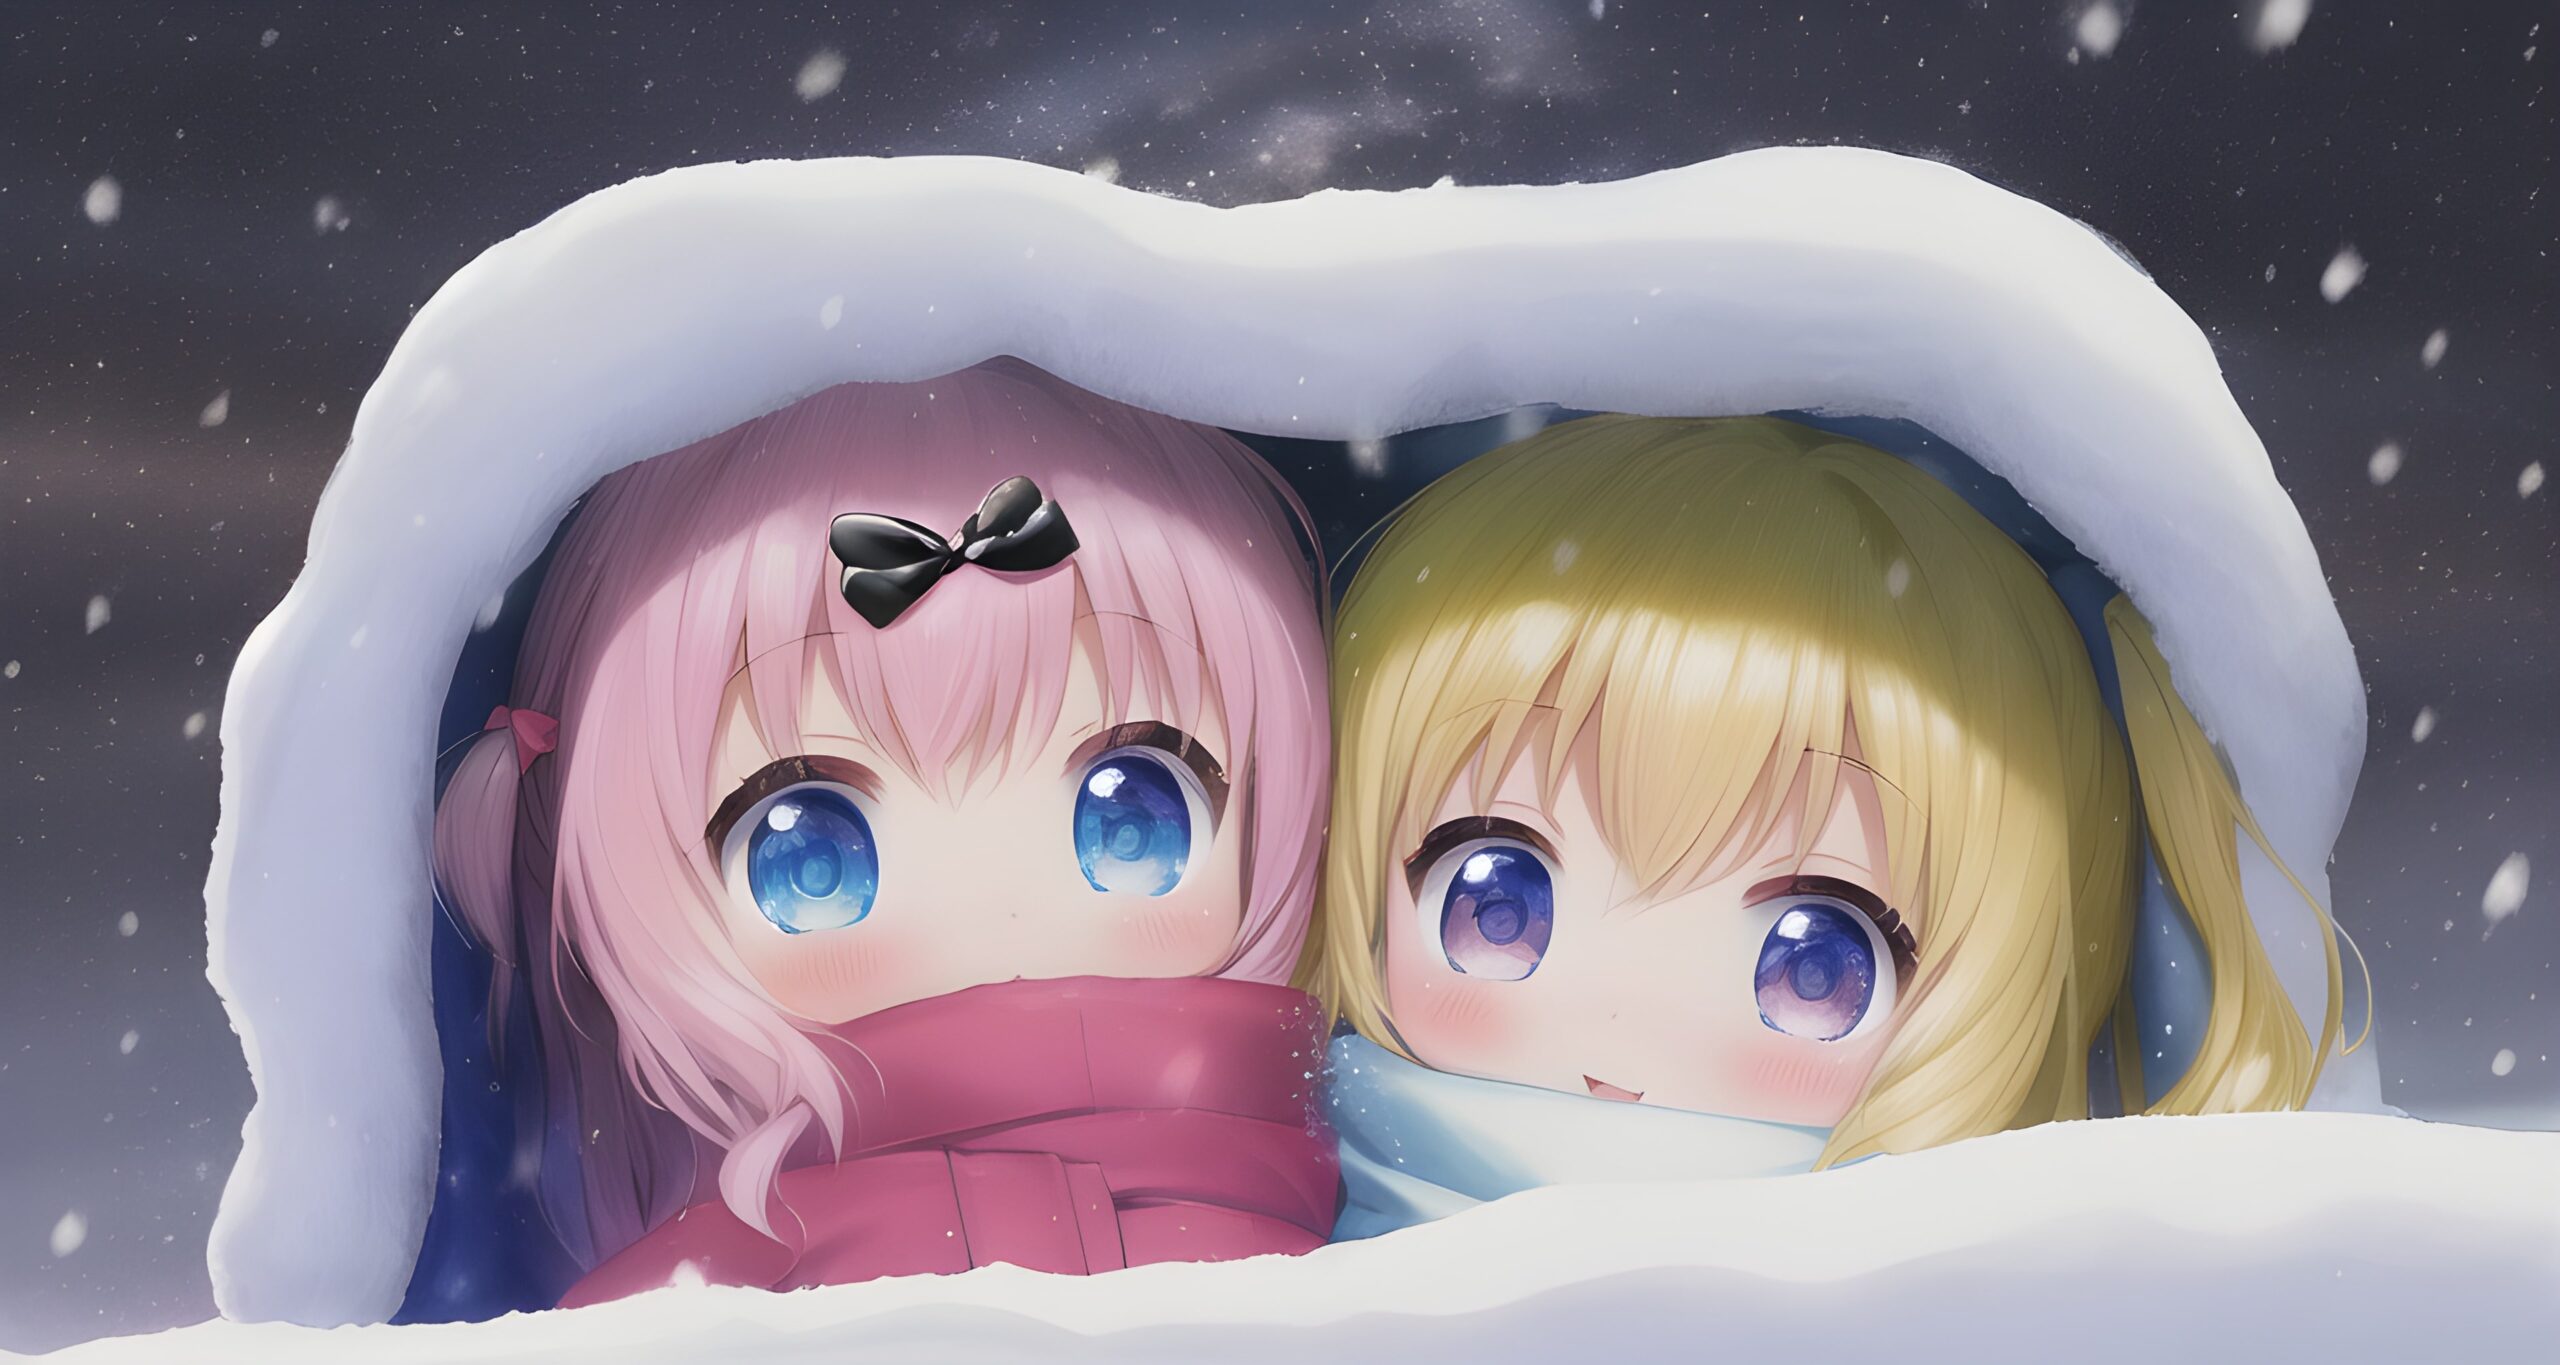 Chibi Chica and Ai under a Snow blanket